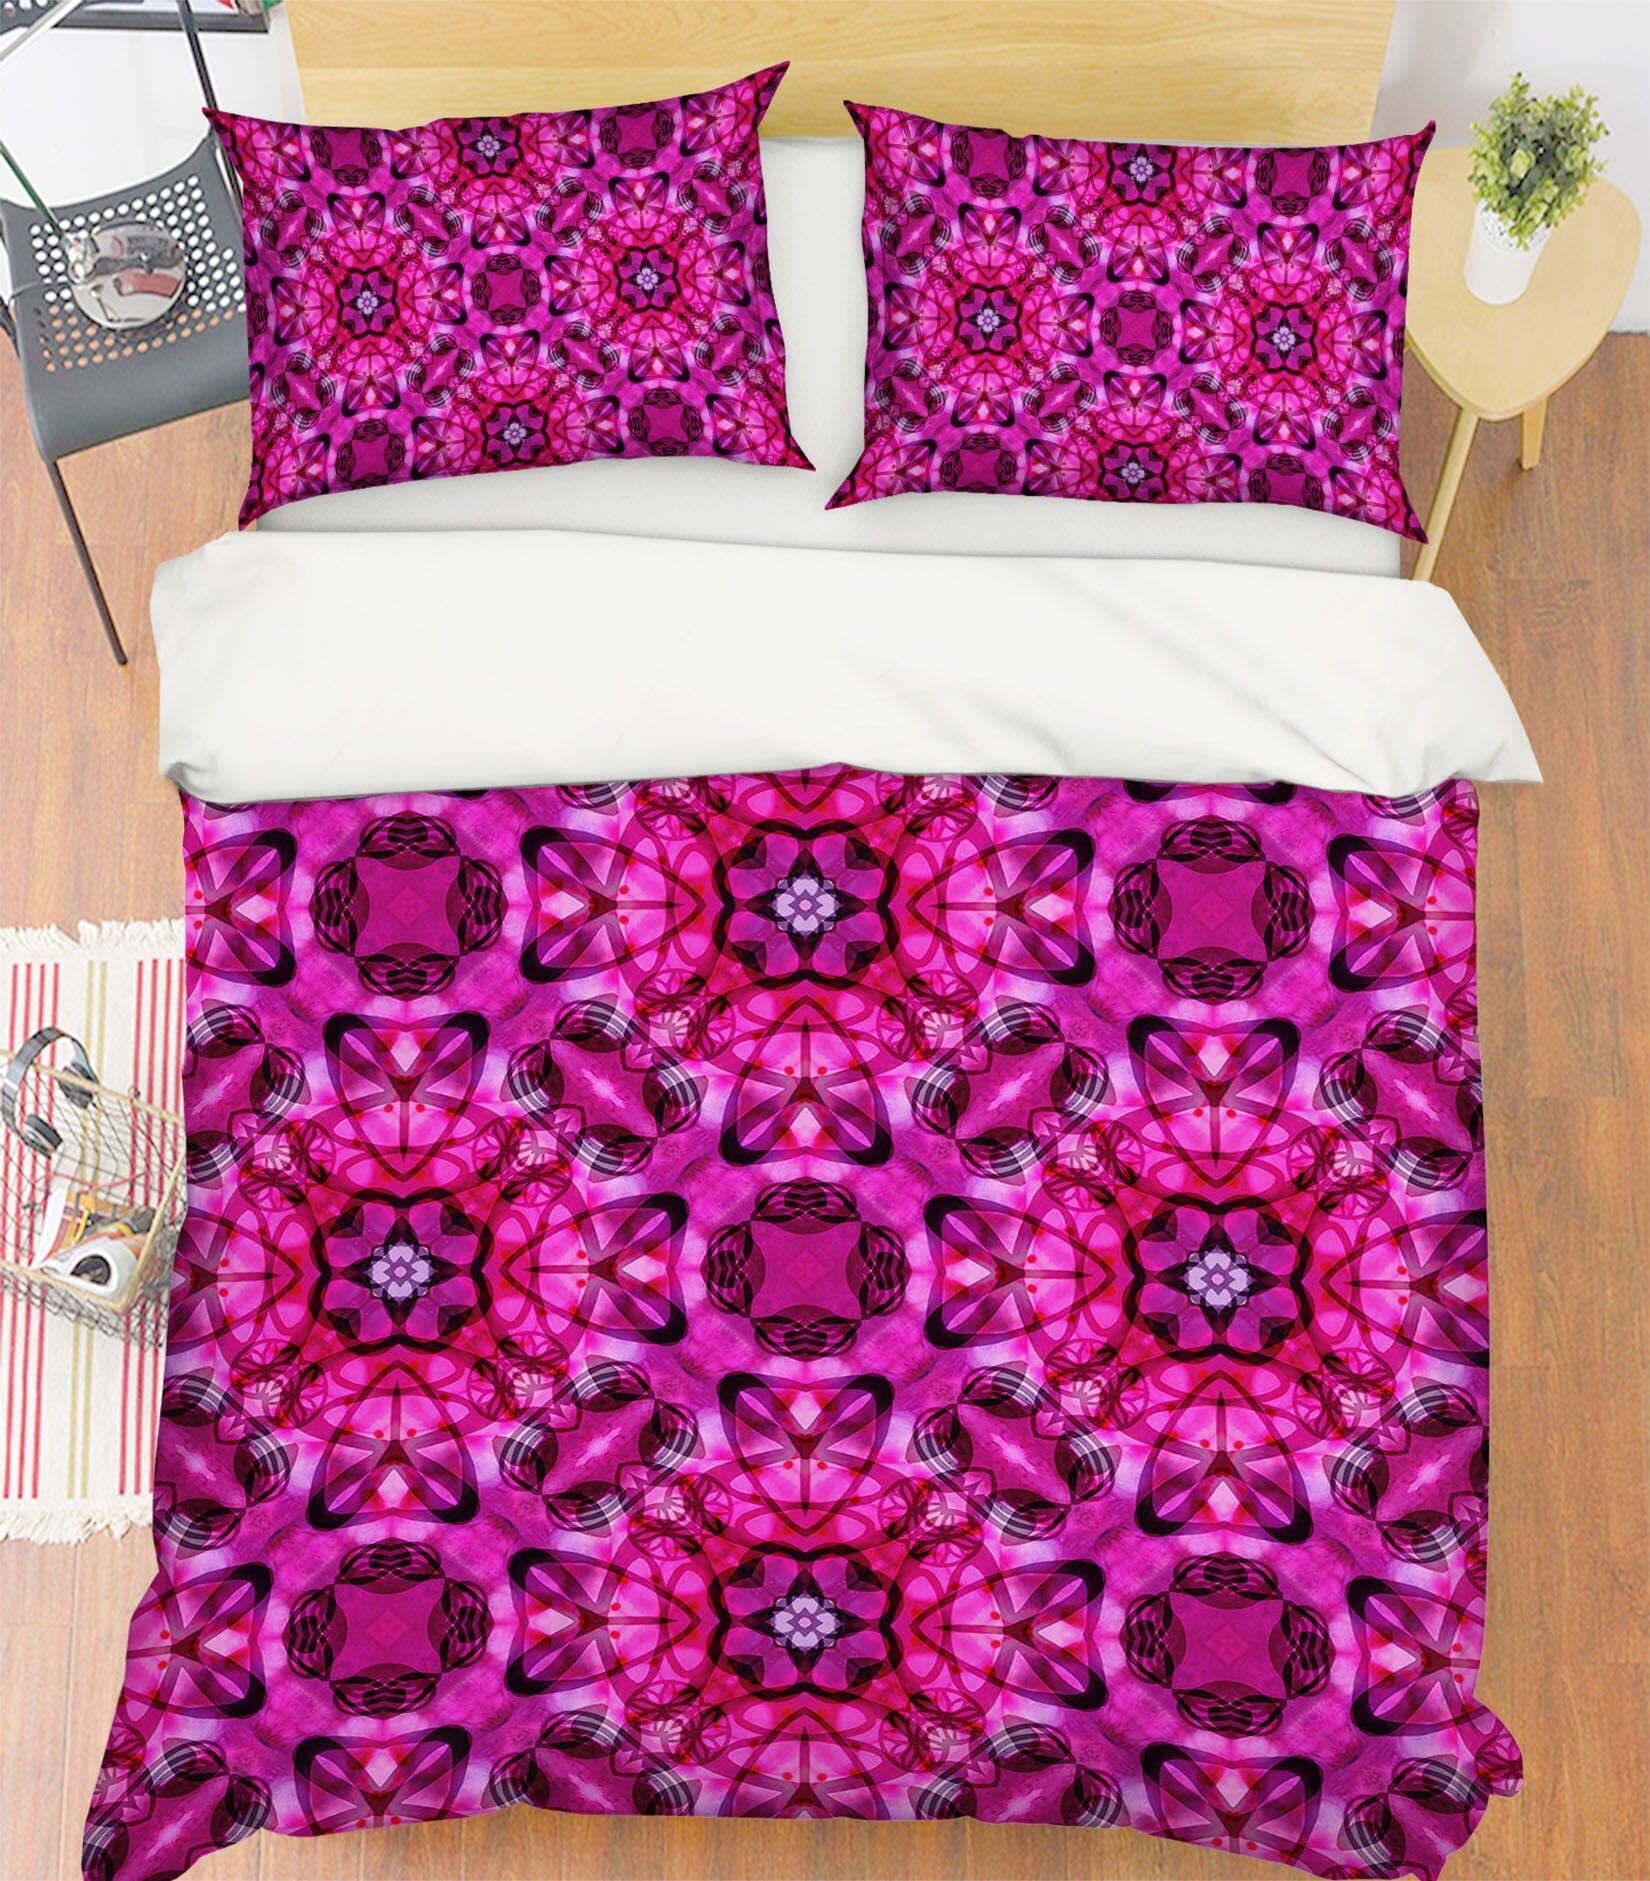 3D Purple Pattern 2007 Shandra Smith Bedding Bed Pillowcases Quilt Quiet Covers AJ Creativity Home 